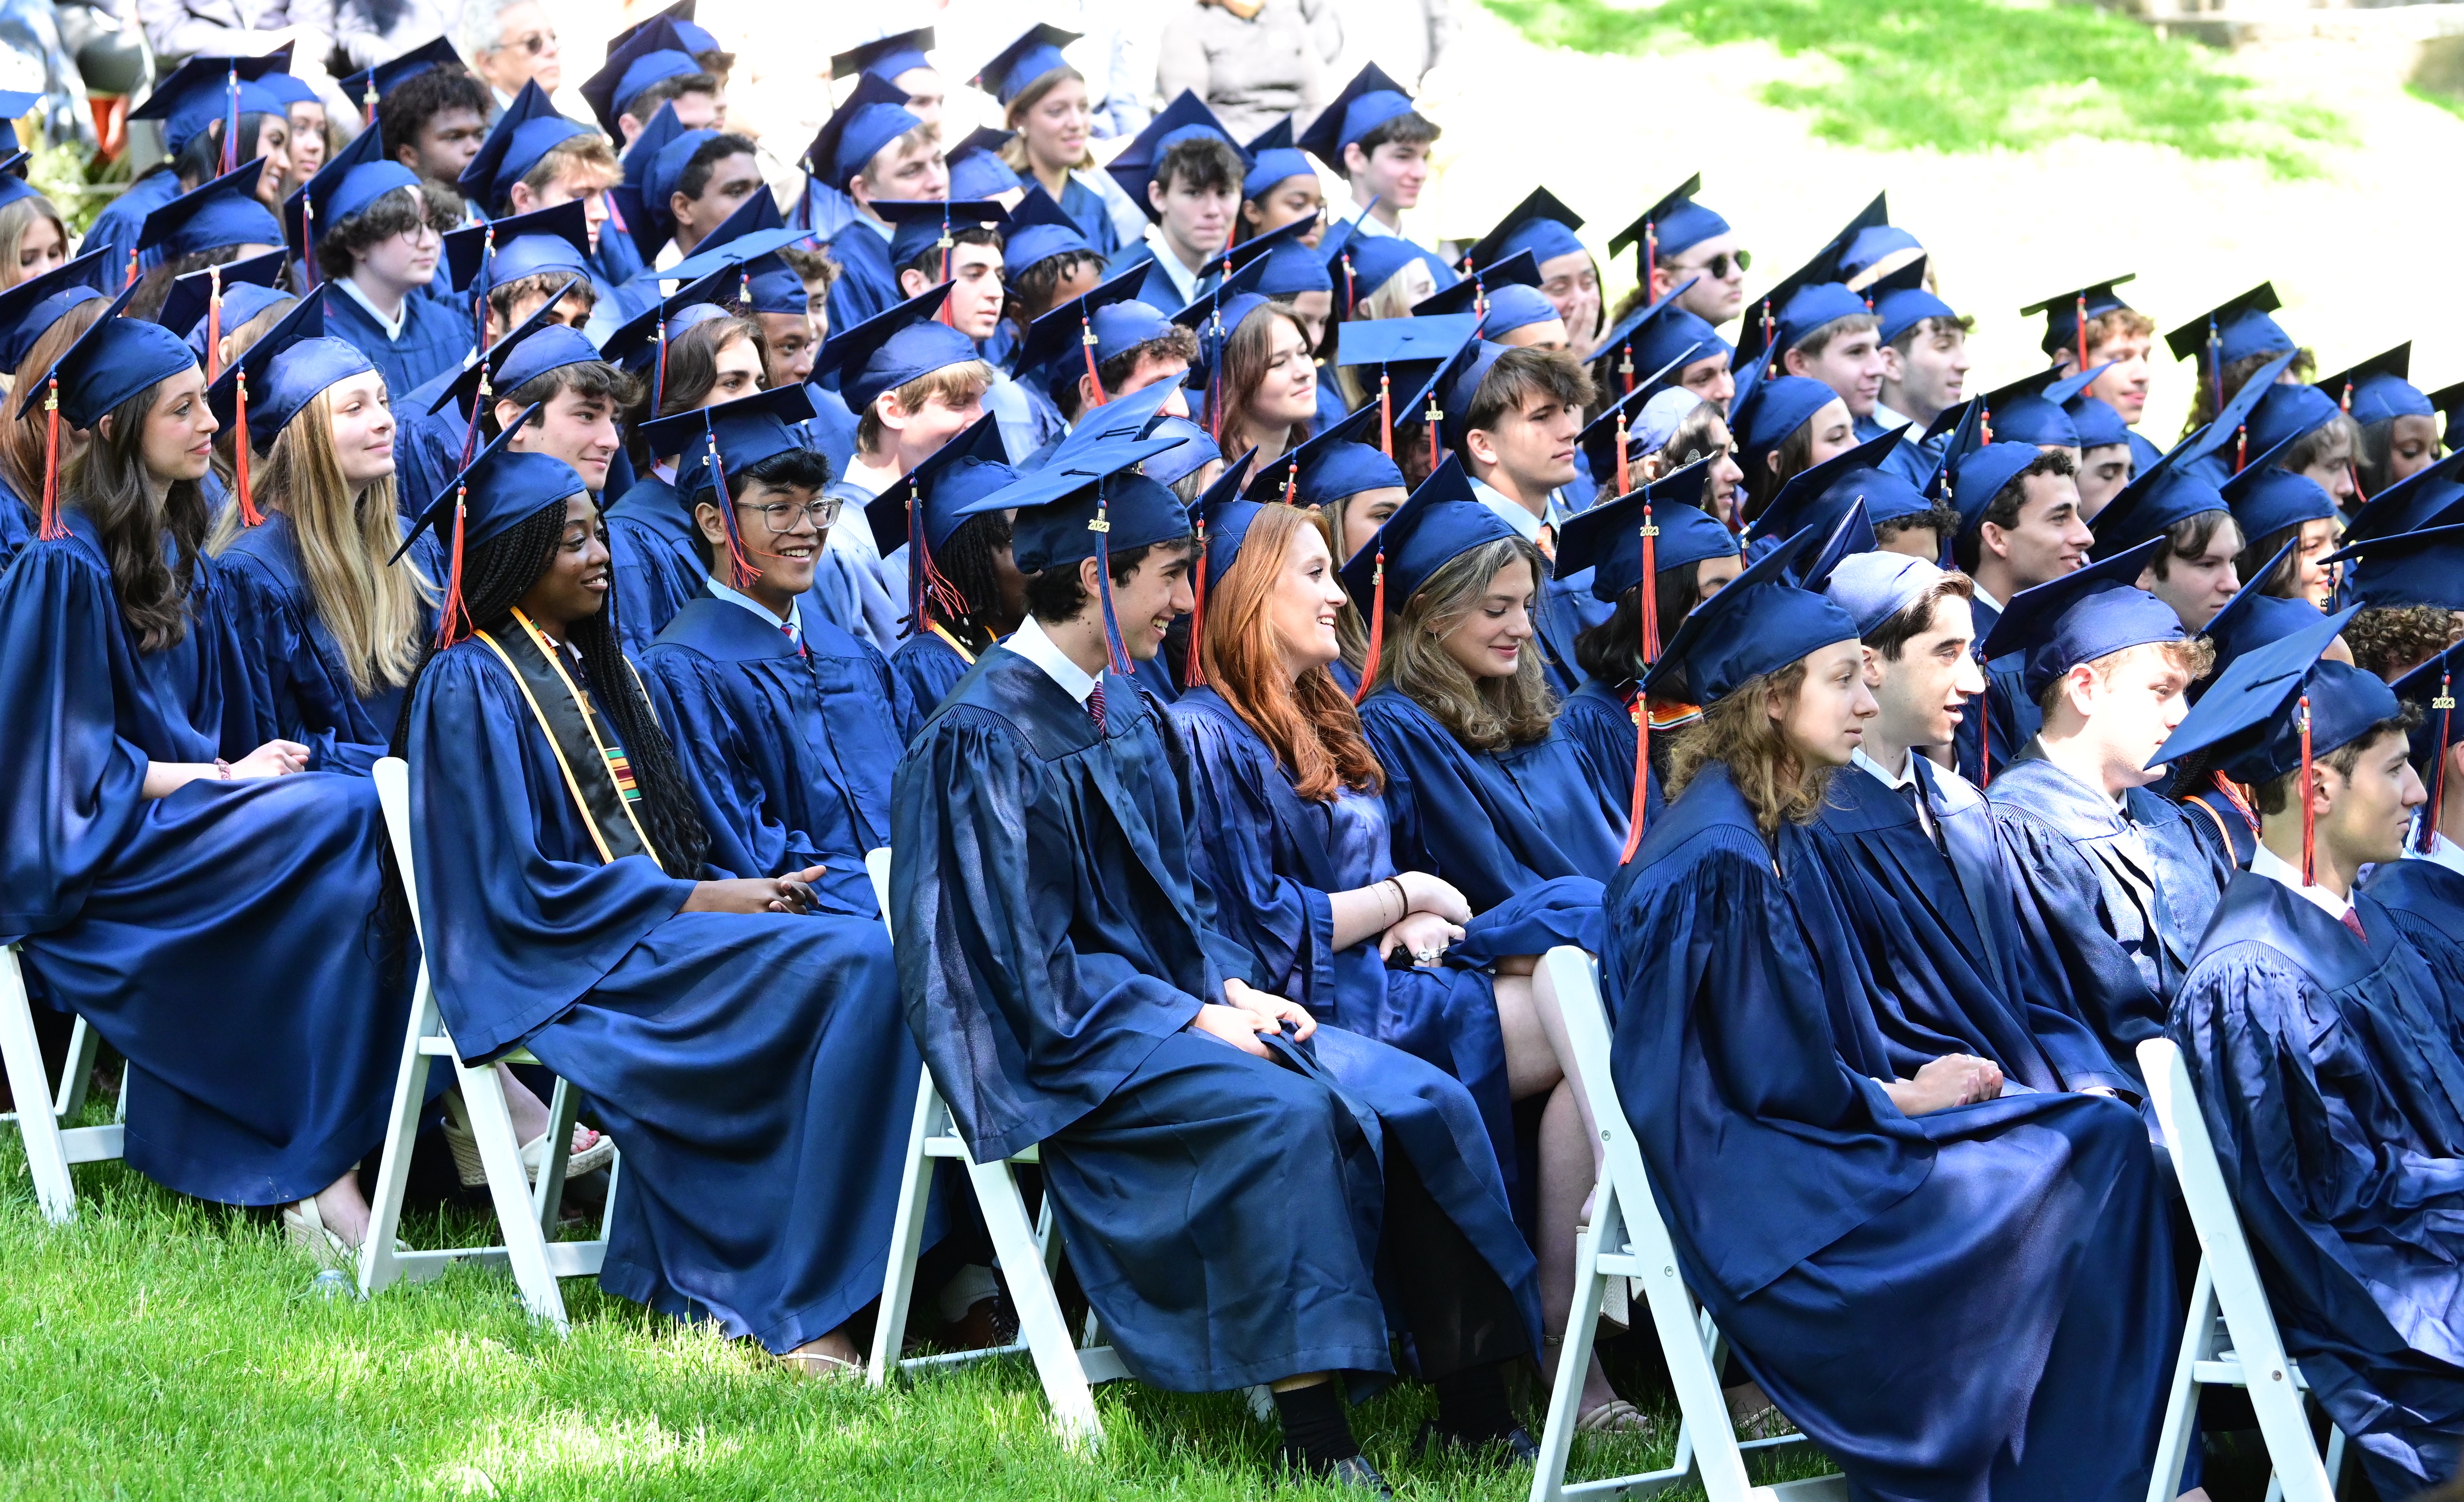 Ethical Culture Fieldston School Commencement students listening to speaker during graduation